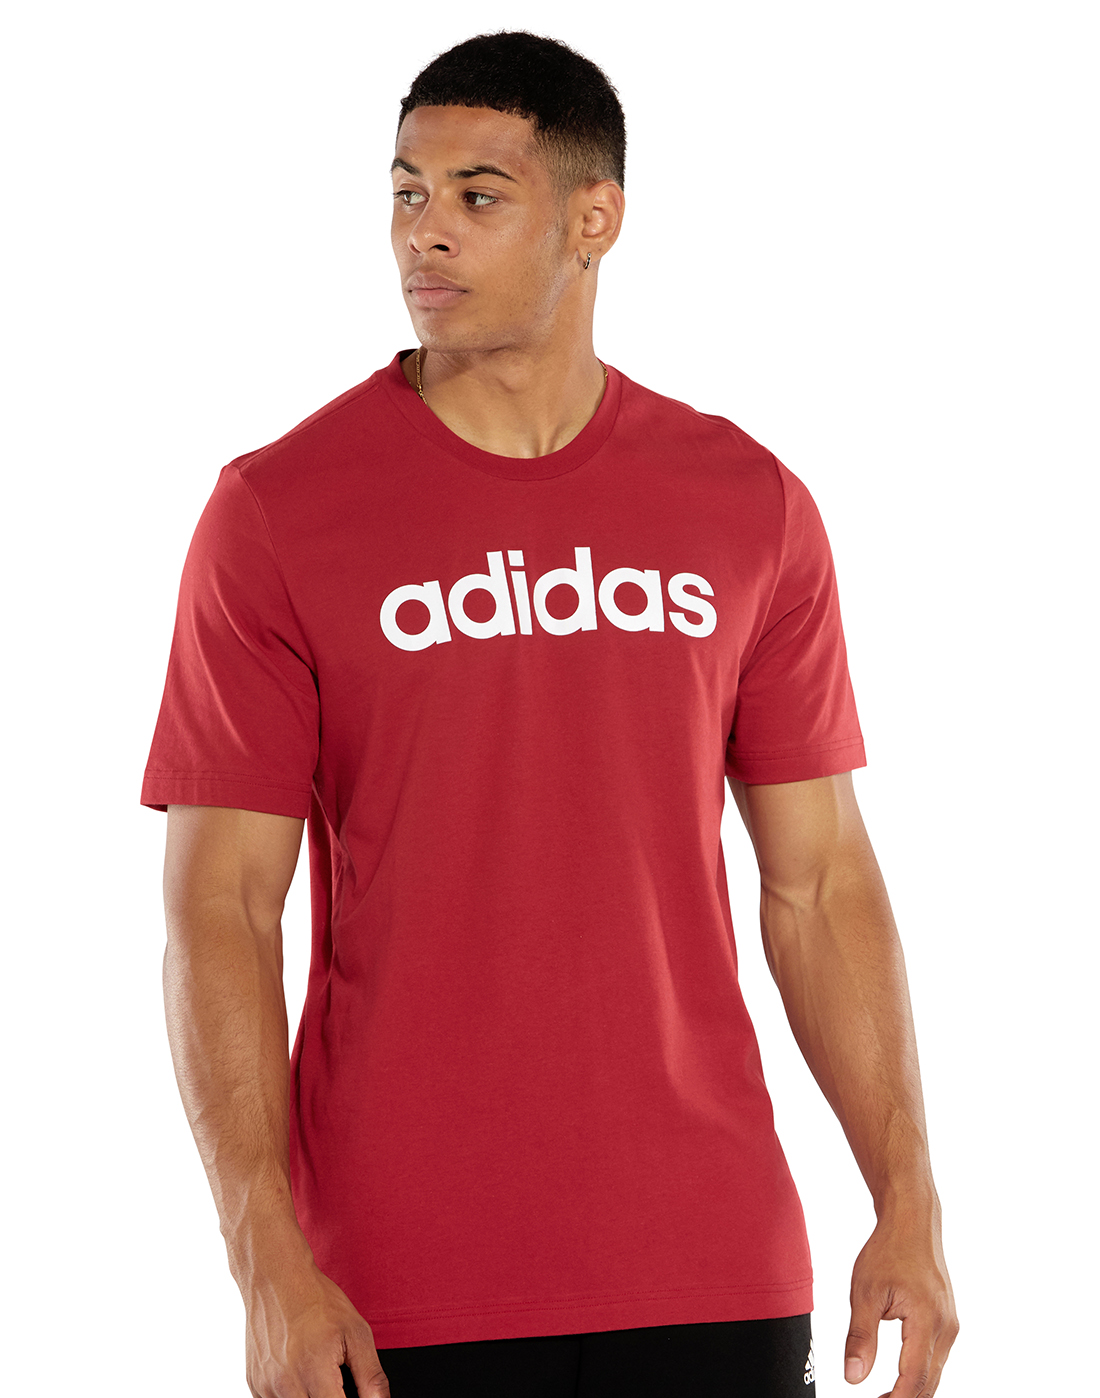 adidas Mens Linear T-Shirt - Red | Life Style Sports IE